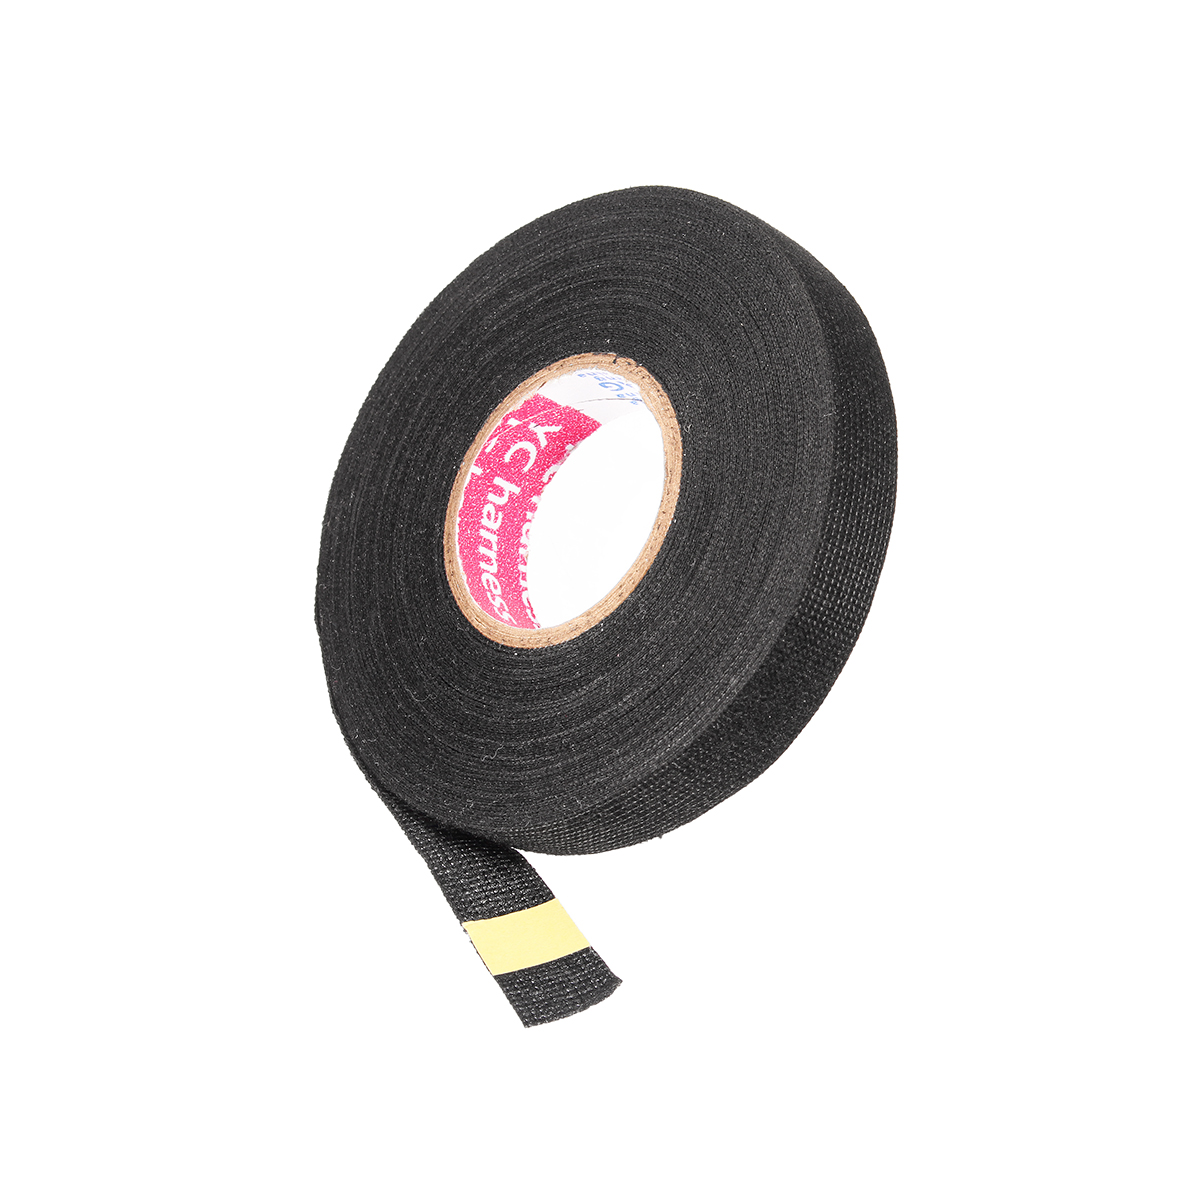 

15mm x 15m Adhesive Cloth Fabric Tape Wool Roll Black Wiring Harness Electric Cable Wire Tape Tools